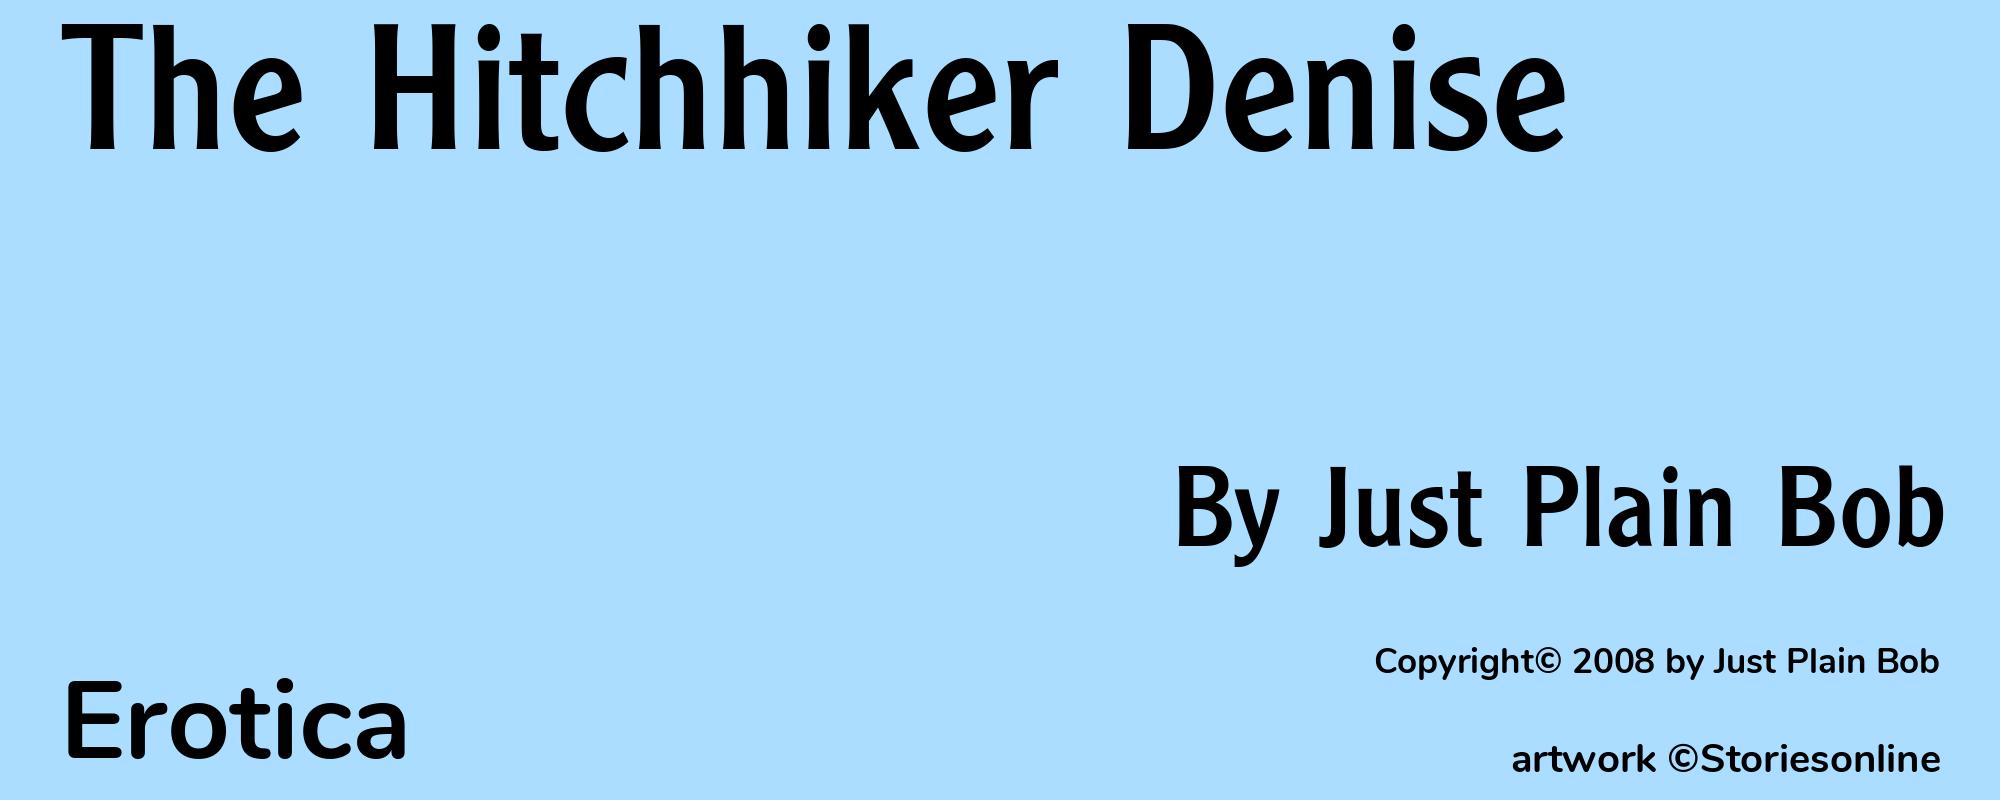 The Hitchhiker Denise - Cover